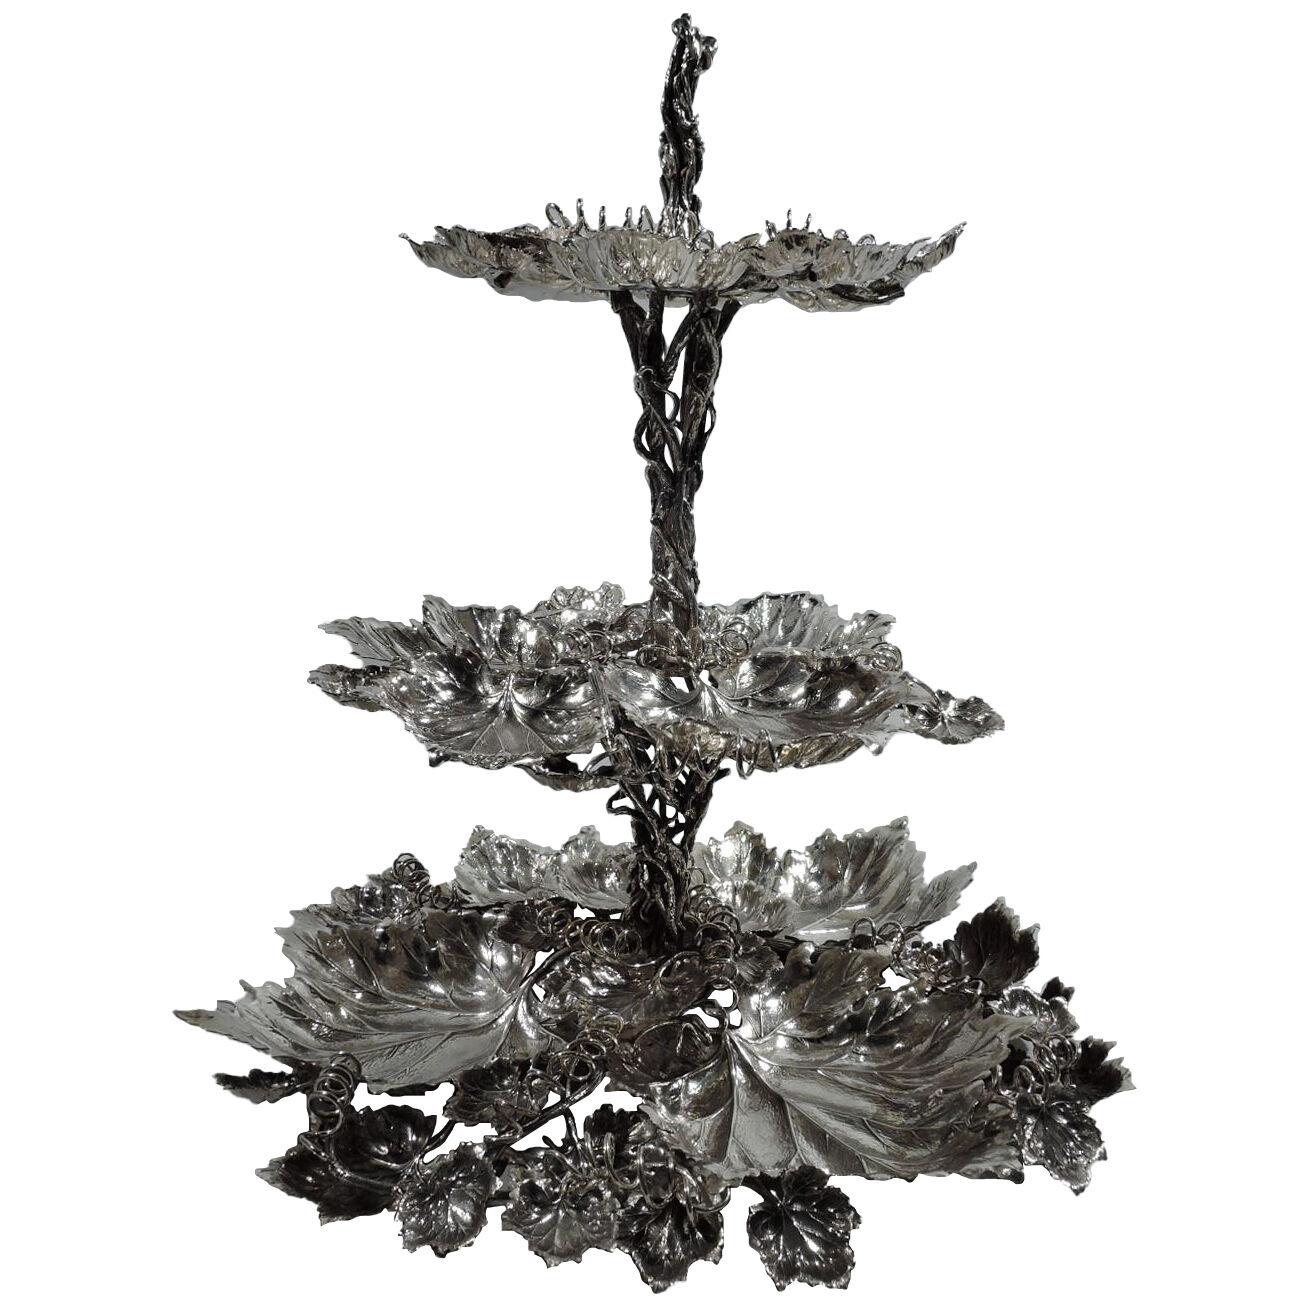 Buccellati Sterling Silver Leaf and Branch 3-Tier Serving Stand